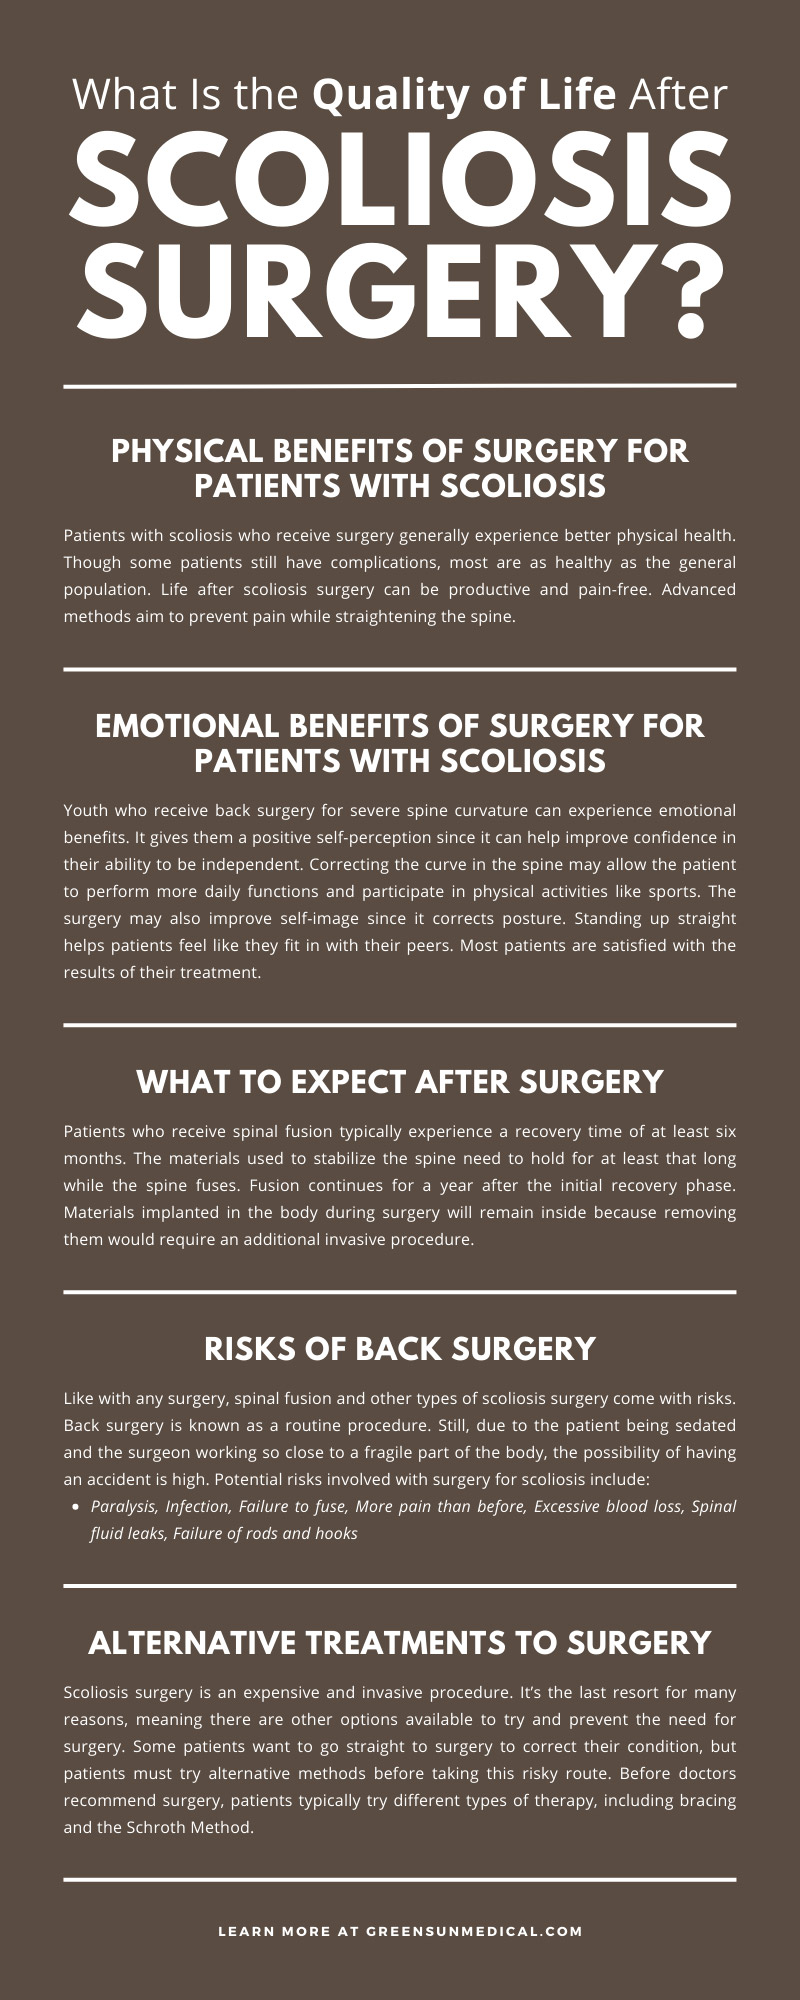 What Is the Quality of Life After Scoliosis Surgery?